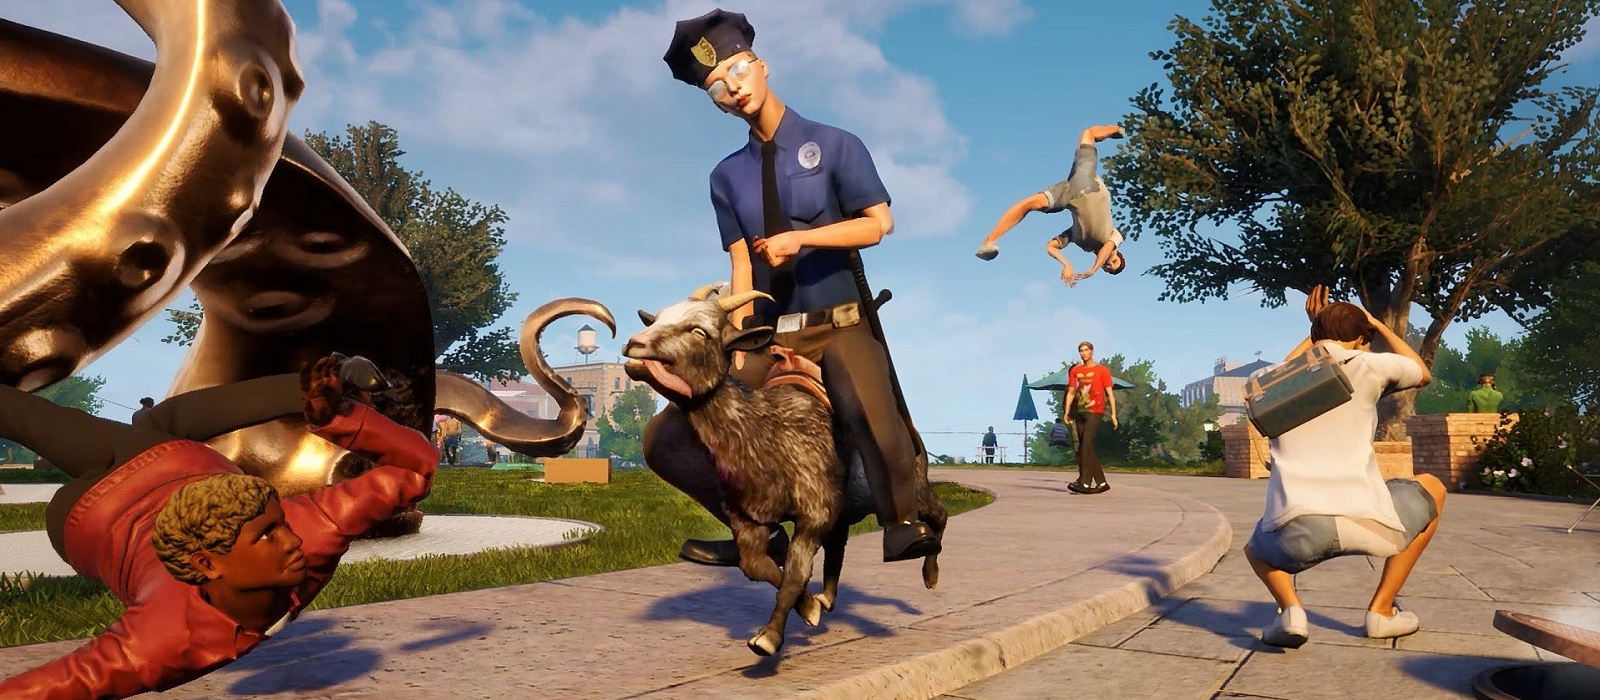 How to complete Wanted: Whistleblowers in Goat Simulator 3 - where to find all the criminals